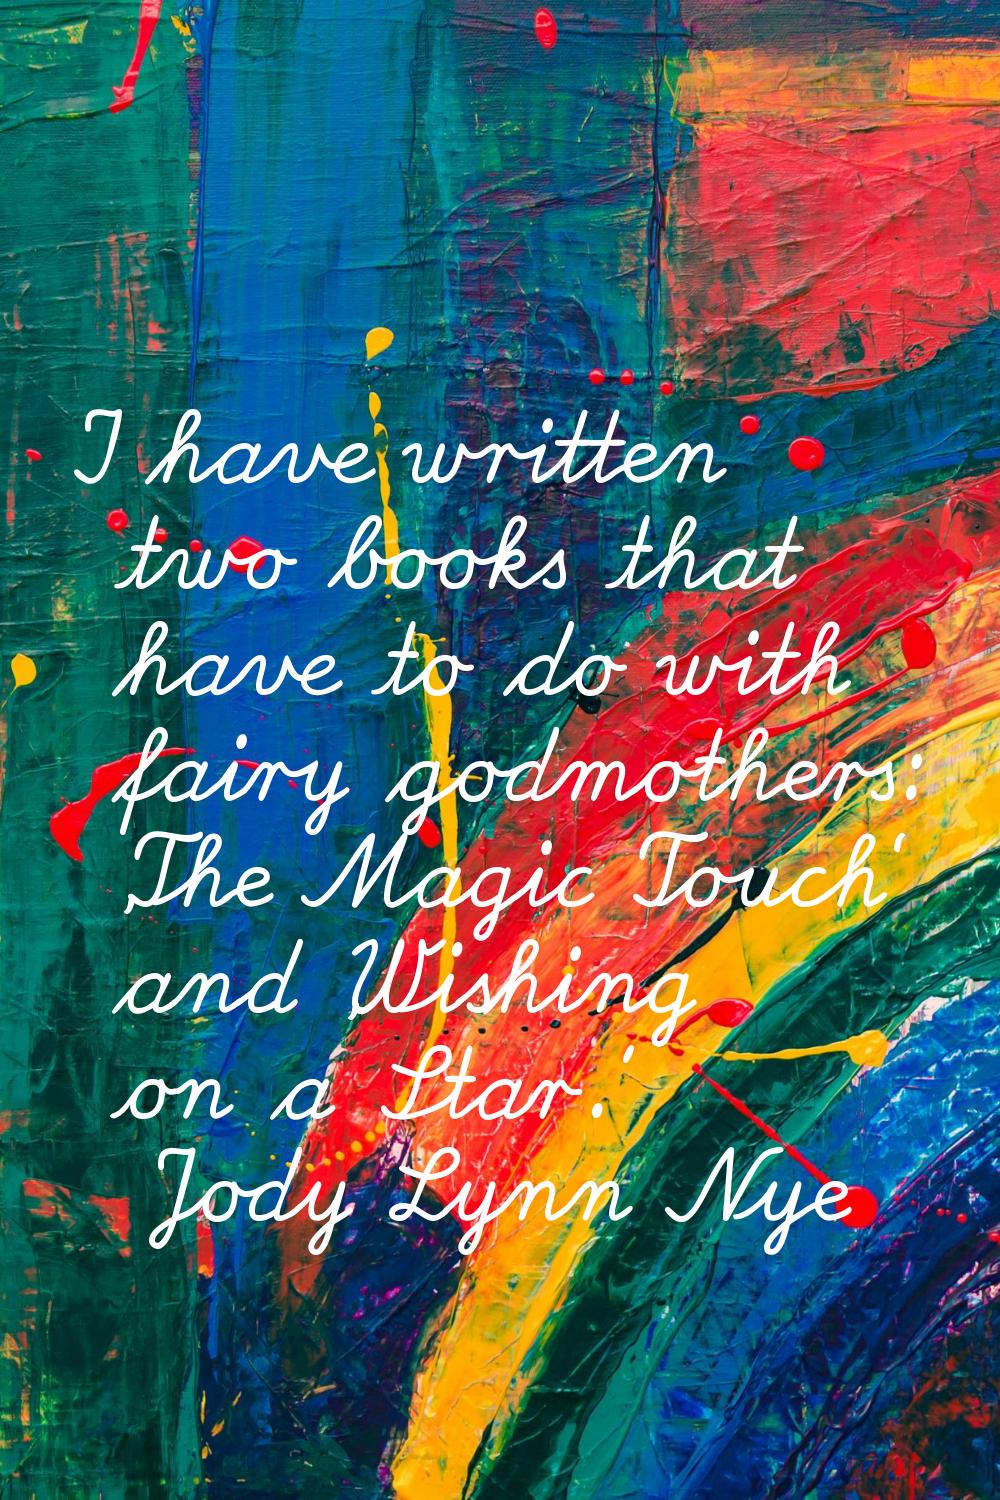 I have written two books that have to do with fairy godmothers: 'The Magic Touch' and 'Wishing on a